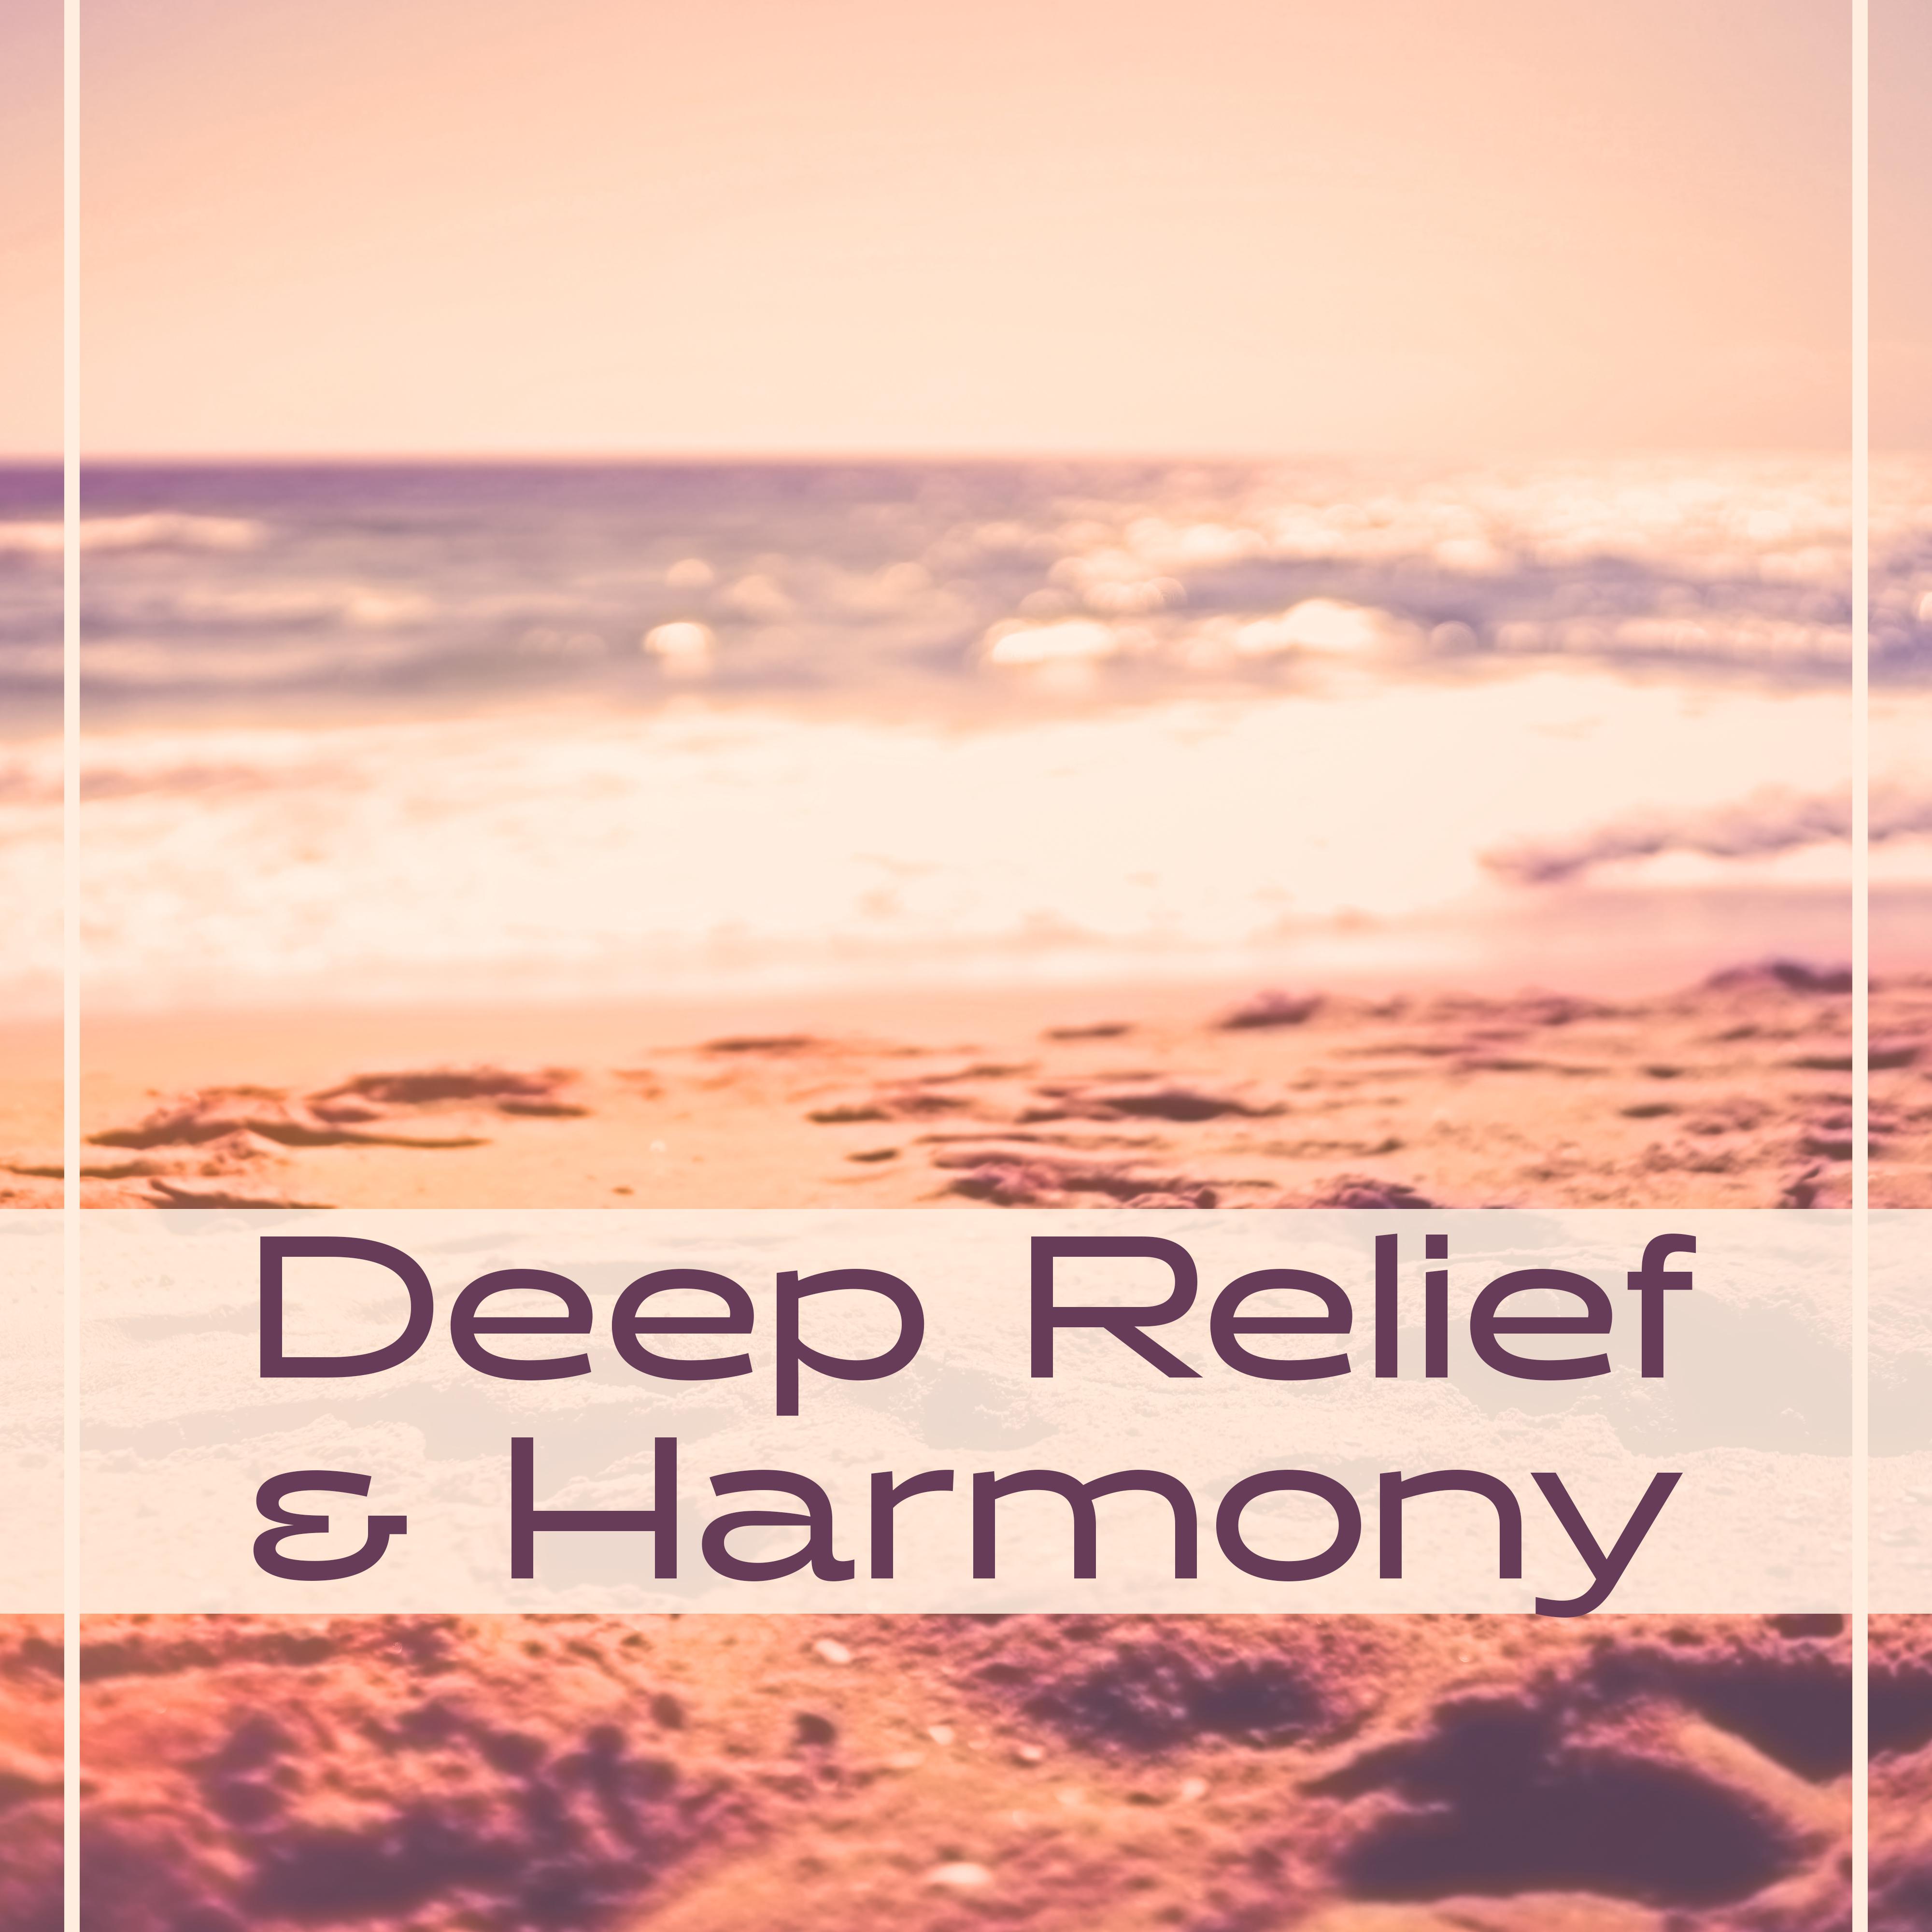 Deep Relief & Harmony – Soothing Sounds for Relaxation, Pure Waves, Deep Sleep, Beach Time, Chillout, Stress Relief